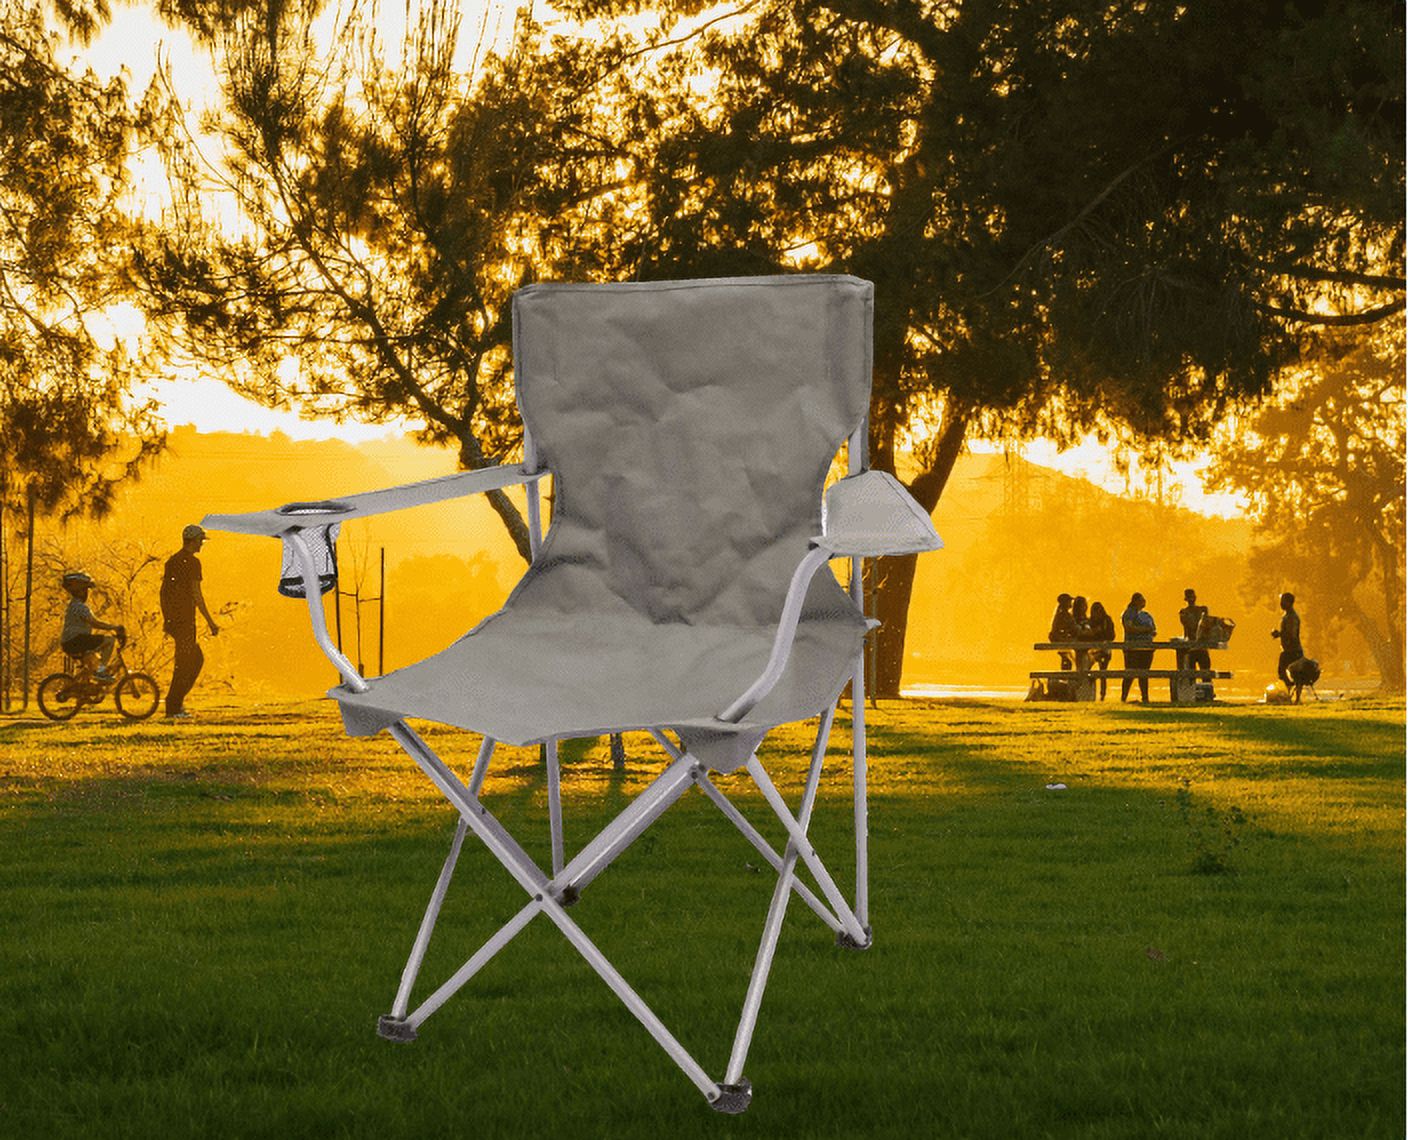 Ozark Trail Quad Folding Camp Chair 2 Pack,with Mesh Cup Holder - image 4 of 17